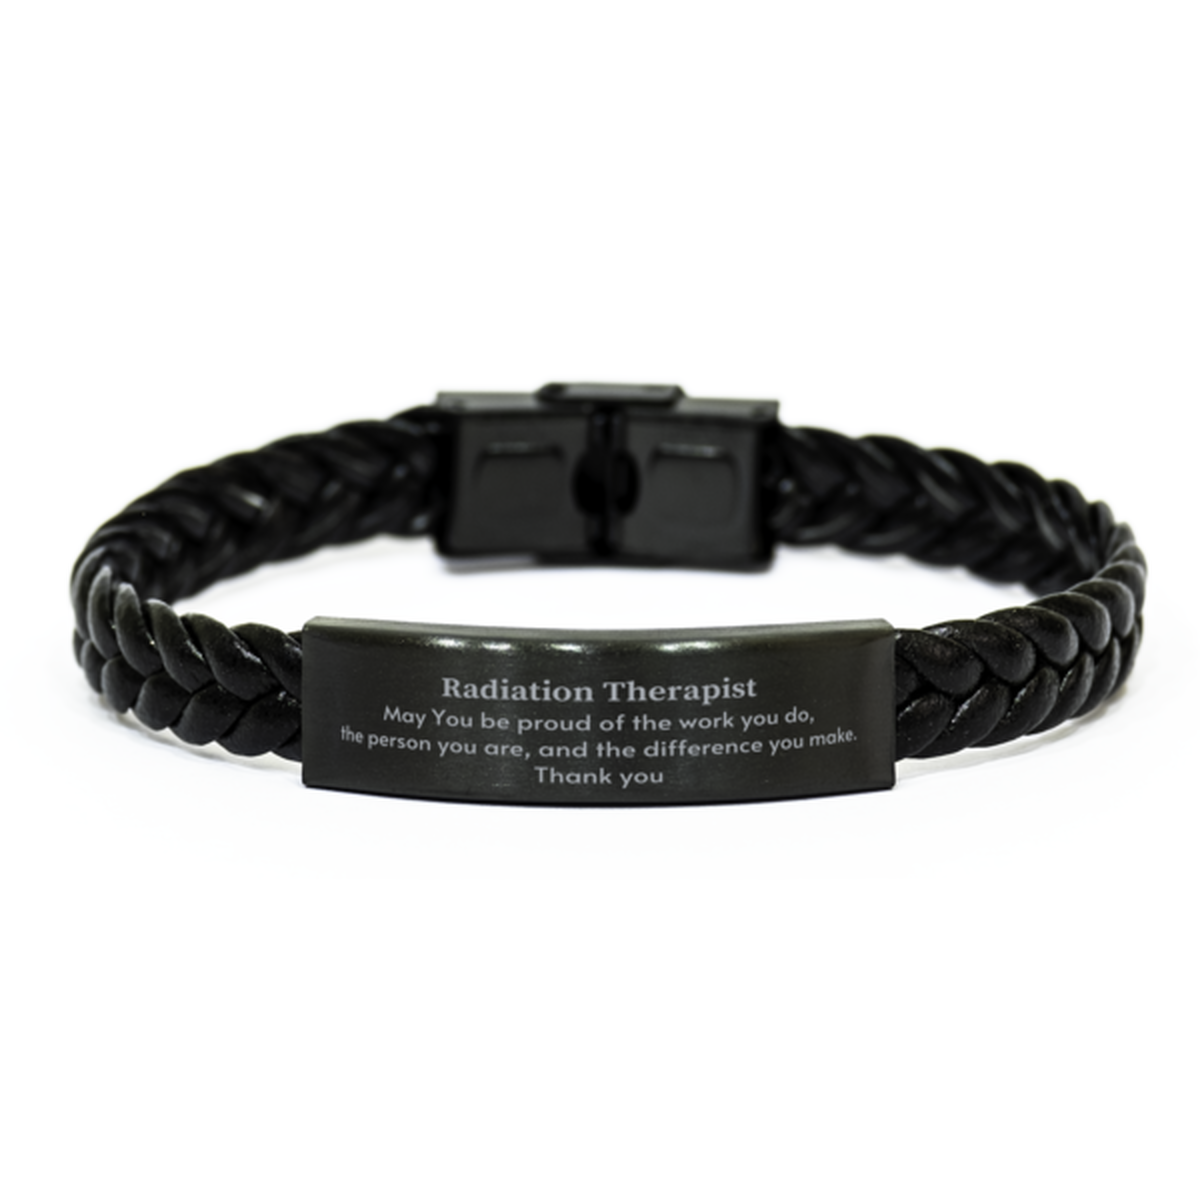 Heartwarming Braided Leather Bracelet Retirement Coworkers Gifts for Radiation Therapist, Radiation Therapist May You be proud of the work you do, the person you are Gifts for Boss Men Women Friends